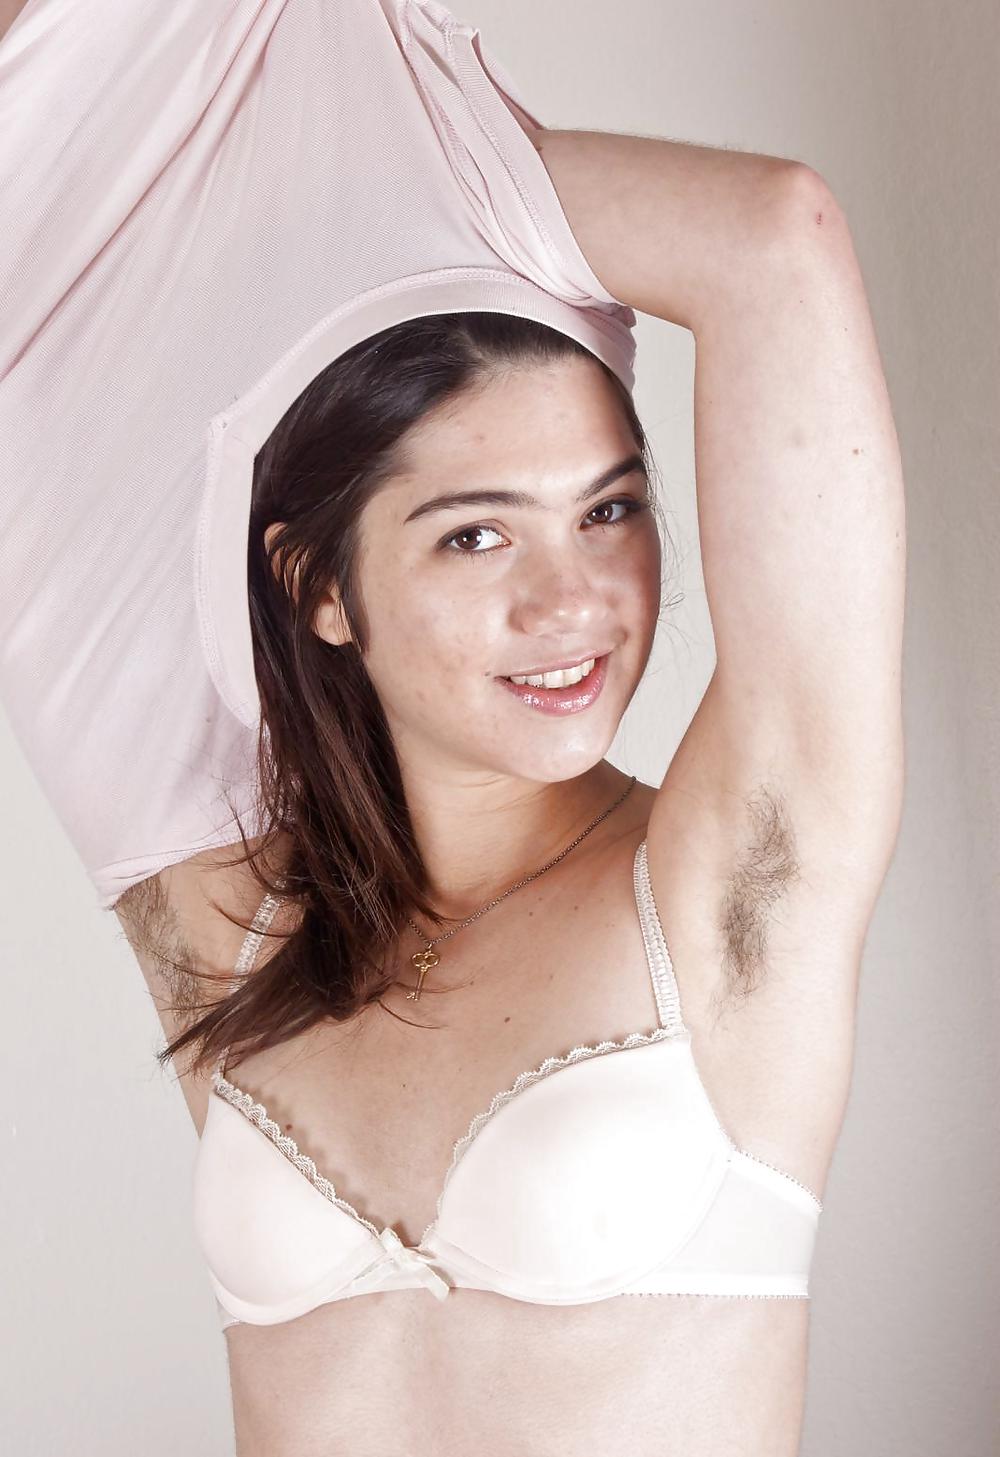 Miscellaneous girls showing hairy, unshaven armpits 1 #36224854